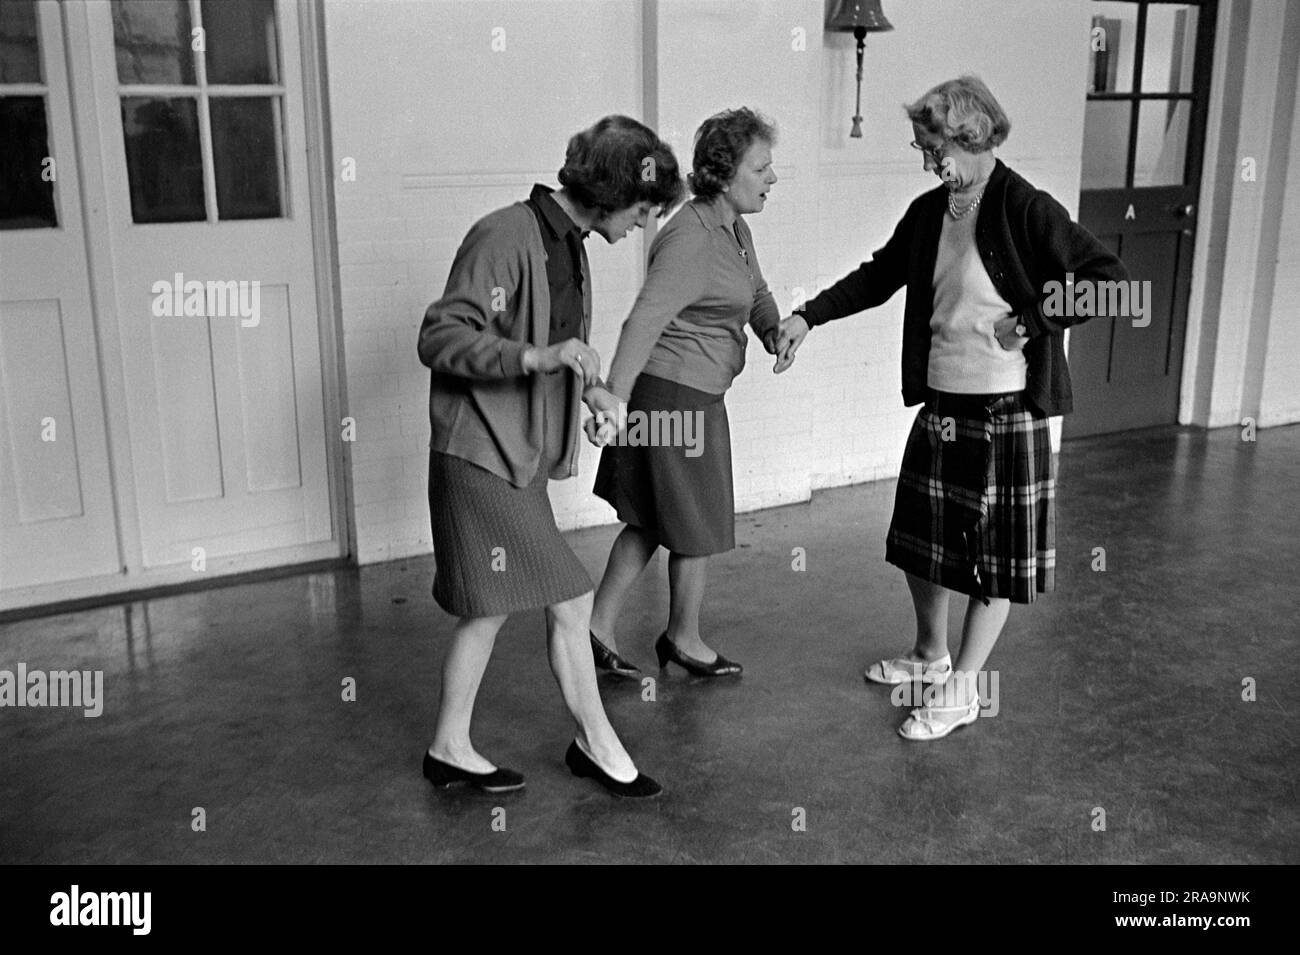 Darby and Joan Club. A blind and partially sighted afternoon dance class for senior citizens at the Battersea Institute. Battersea, London, England circa 1970. 1970s UK HOMER SYKES Stock Photo